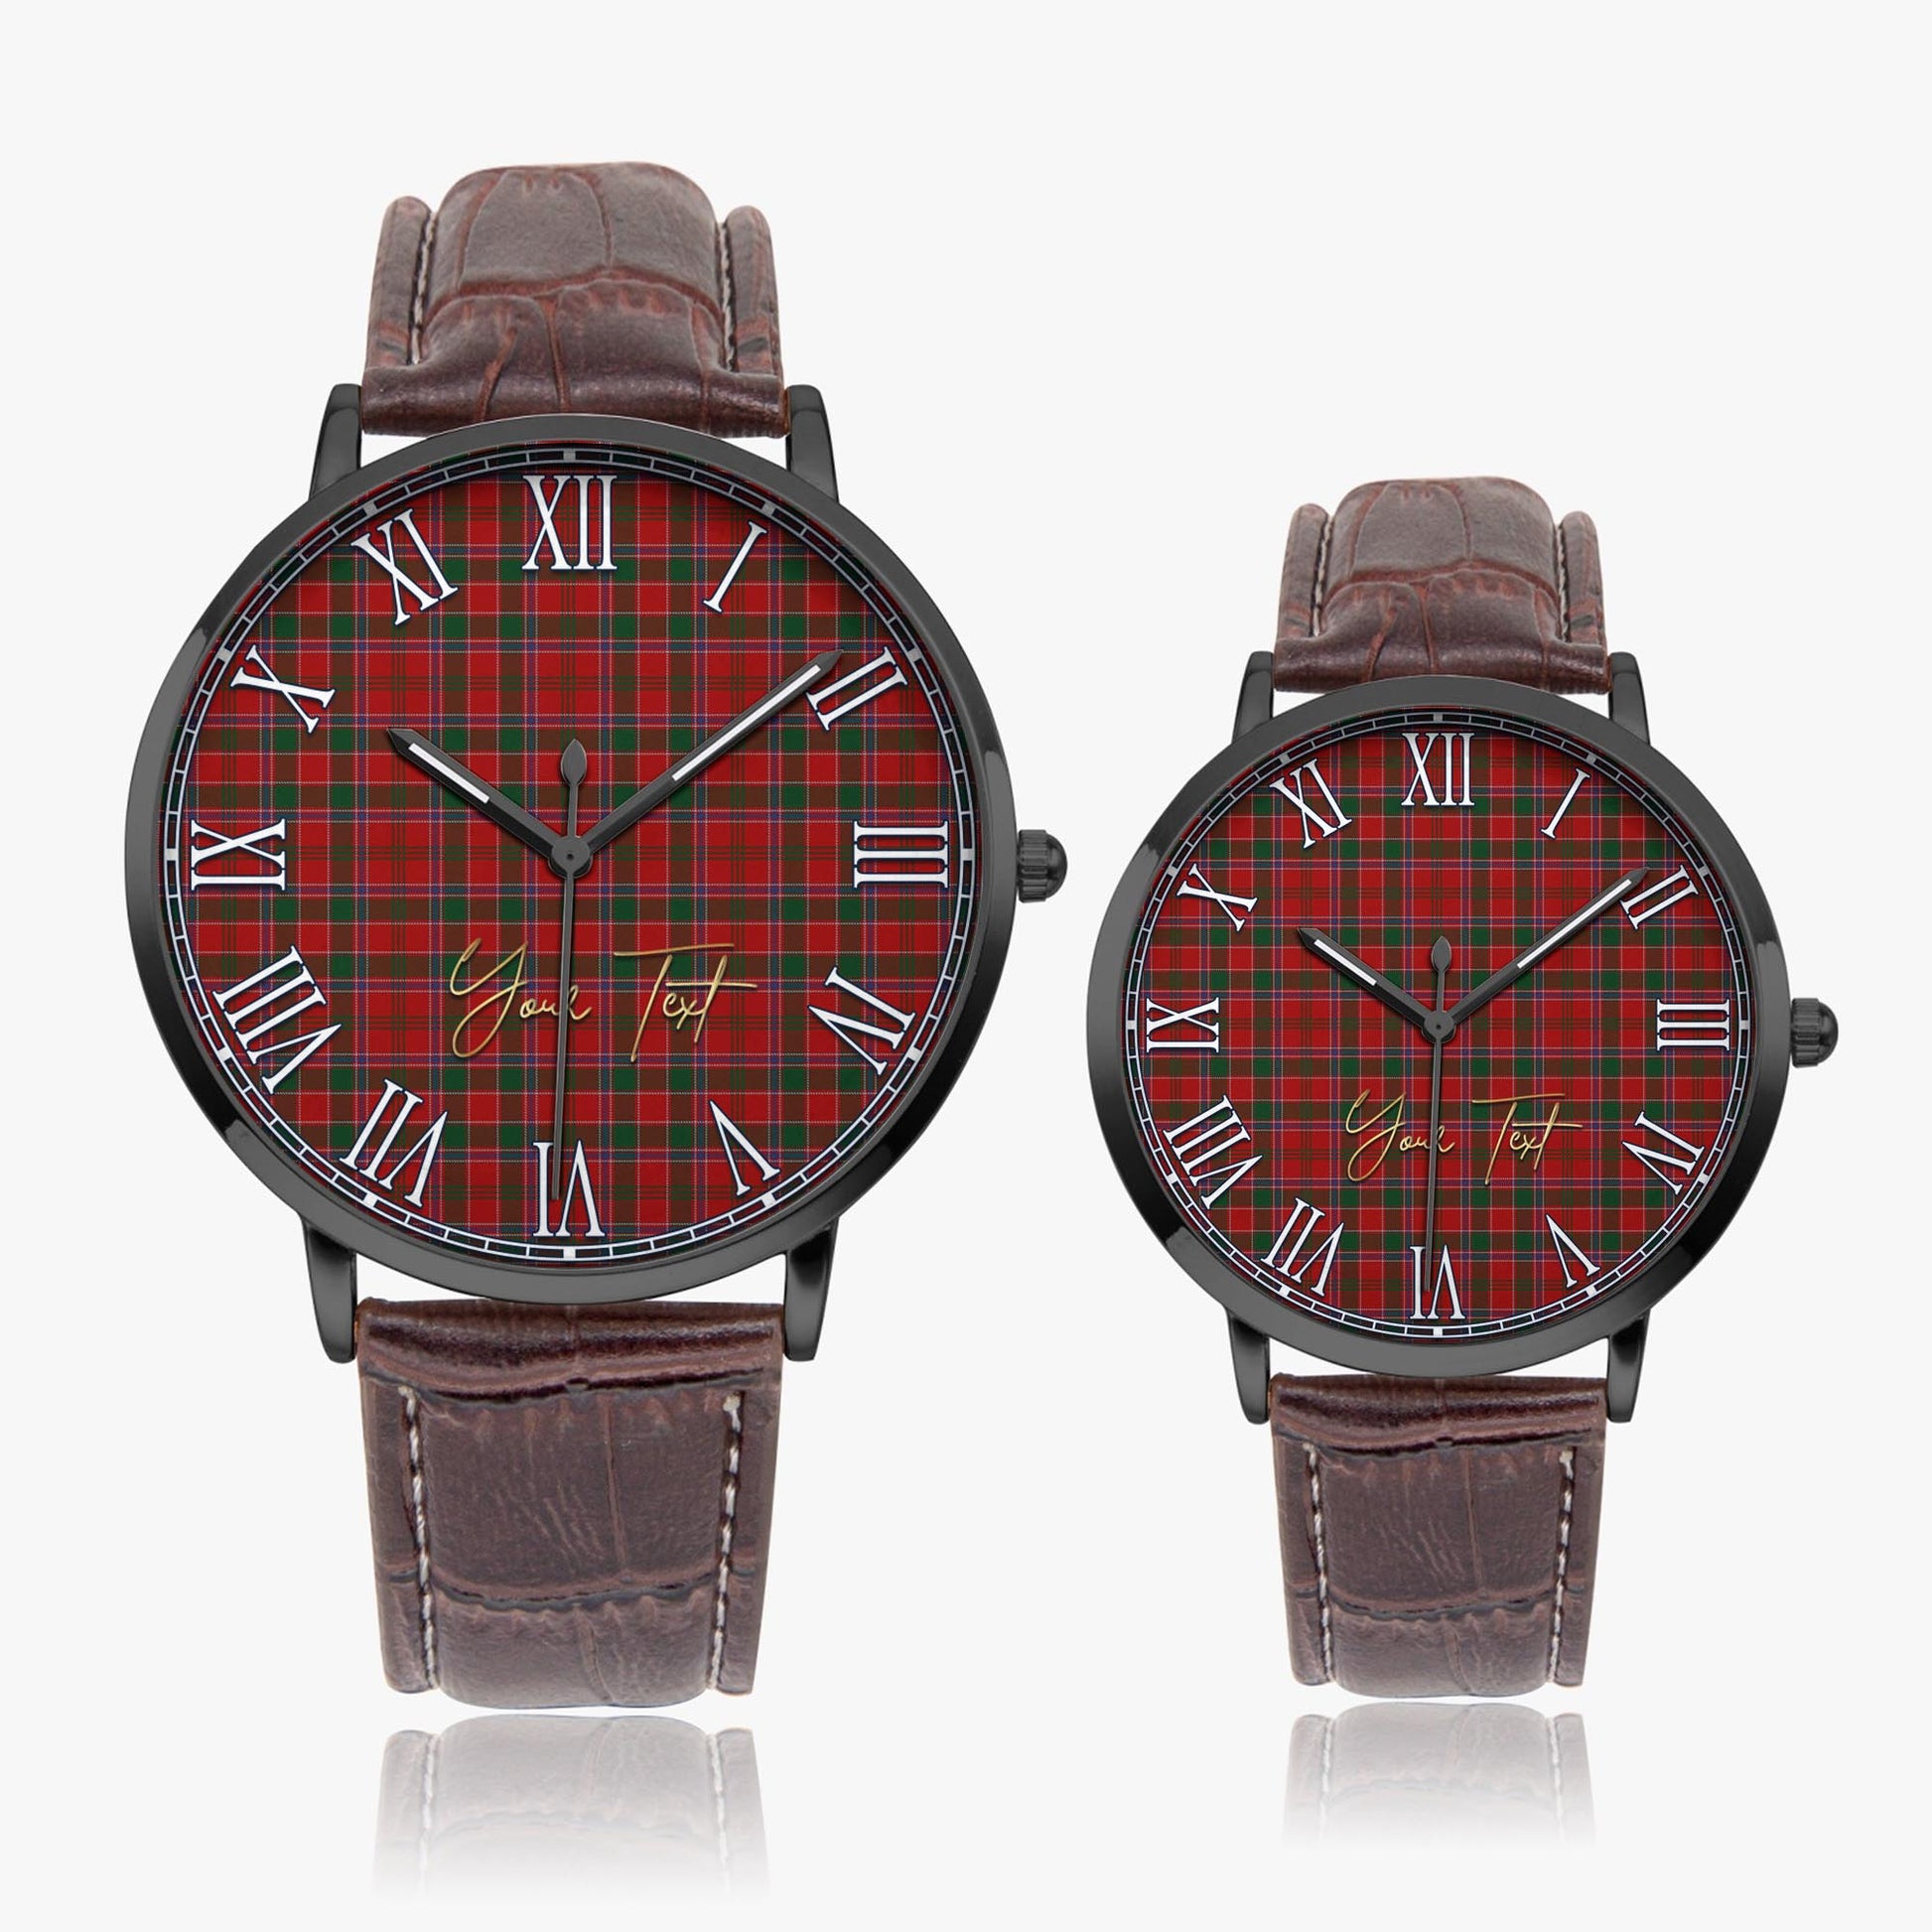 Dalzell (Dalziel) Tartan Personalized Your Text Leather Trap Quartz Watch Ultra Thin Black Case With Brown Leather Strap - Tartanvibesclothing